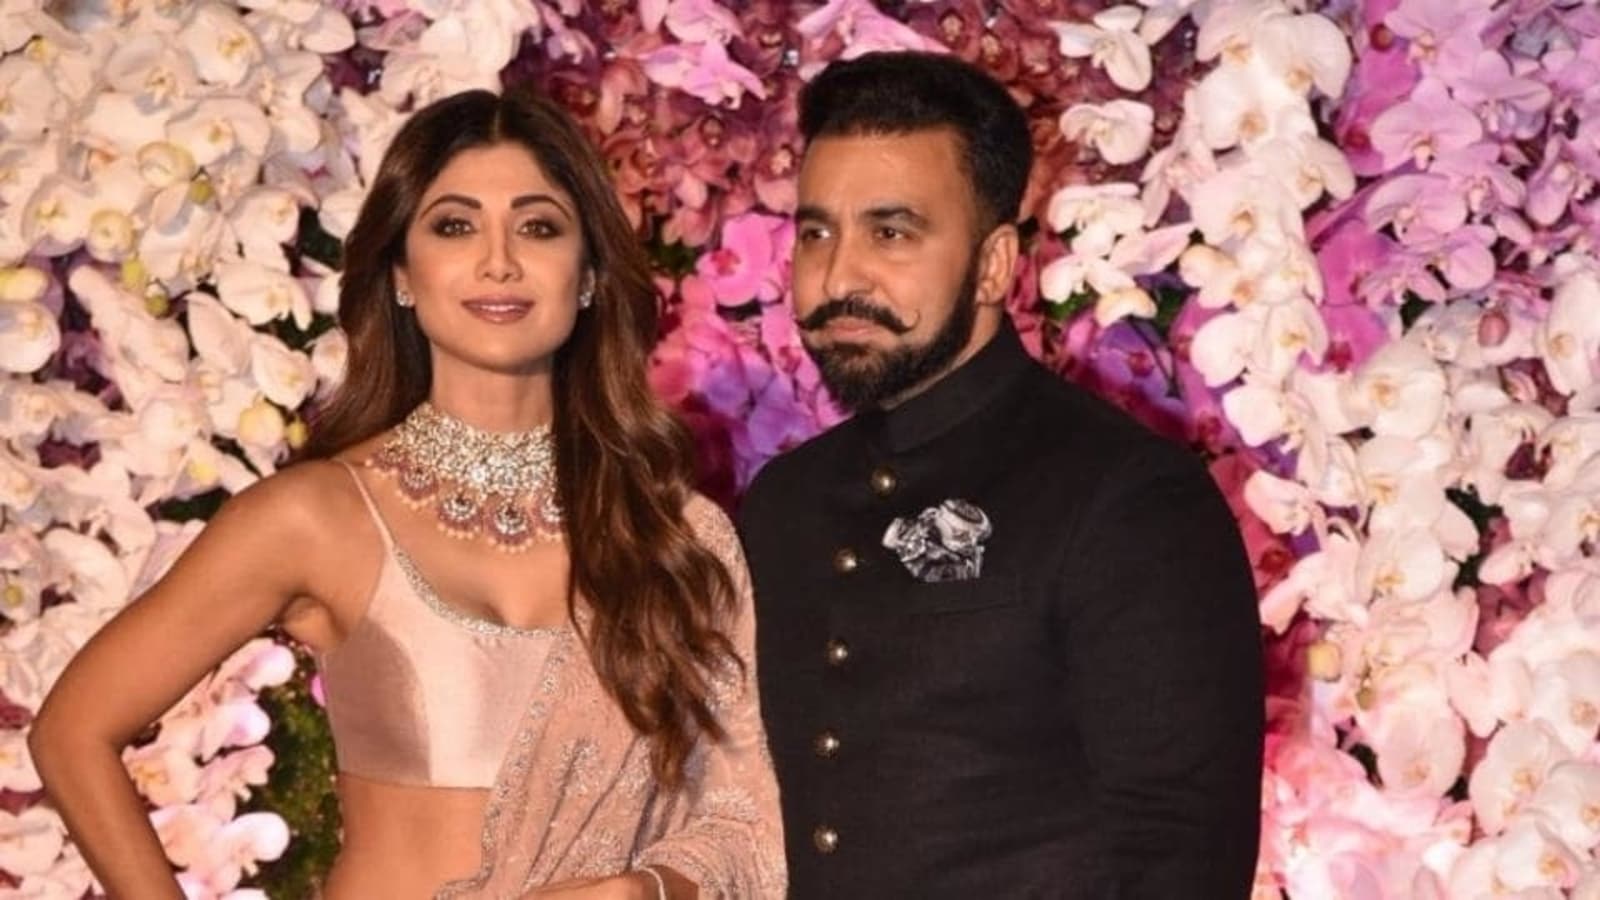 Shilpa Shetty Heroine Sex Open - Shilpa Shetty's husband Raj Kundra deletes Instagram and Twitter accounts  months after bail in porn case | Bollywood - Hindustan Times